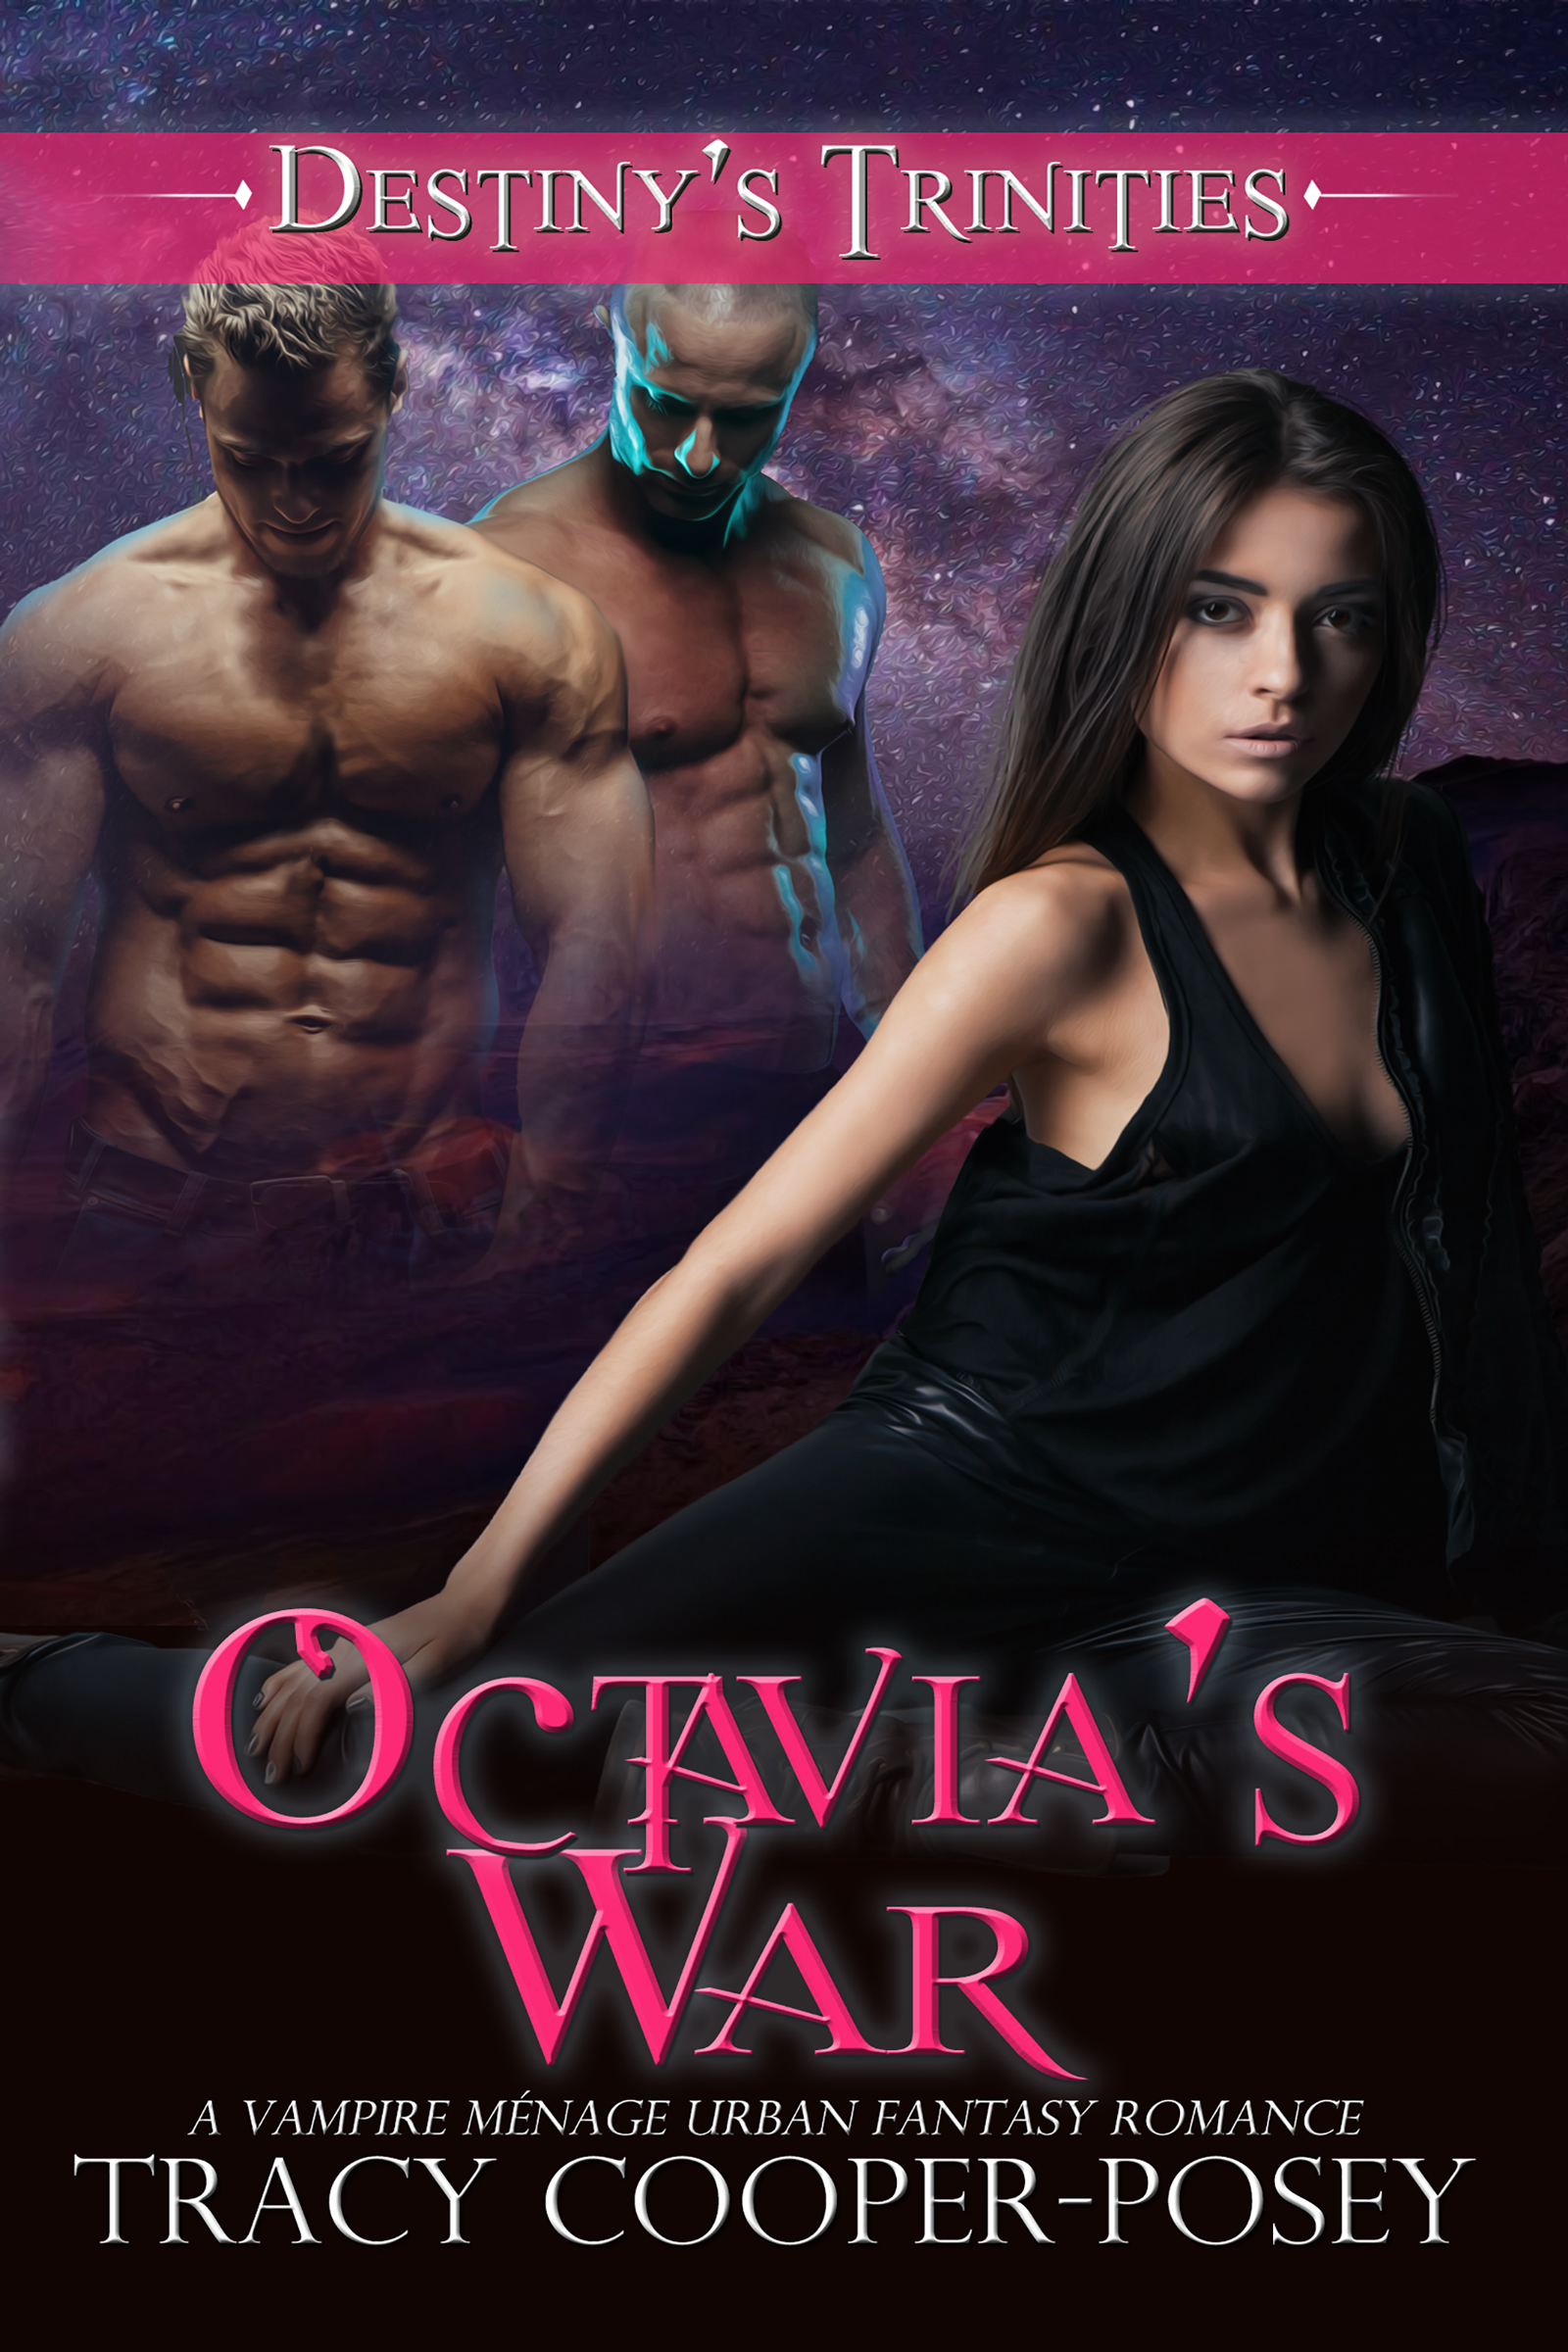 Octavia's War (2016) by Tracy Cooper-Posey